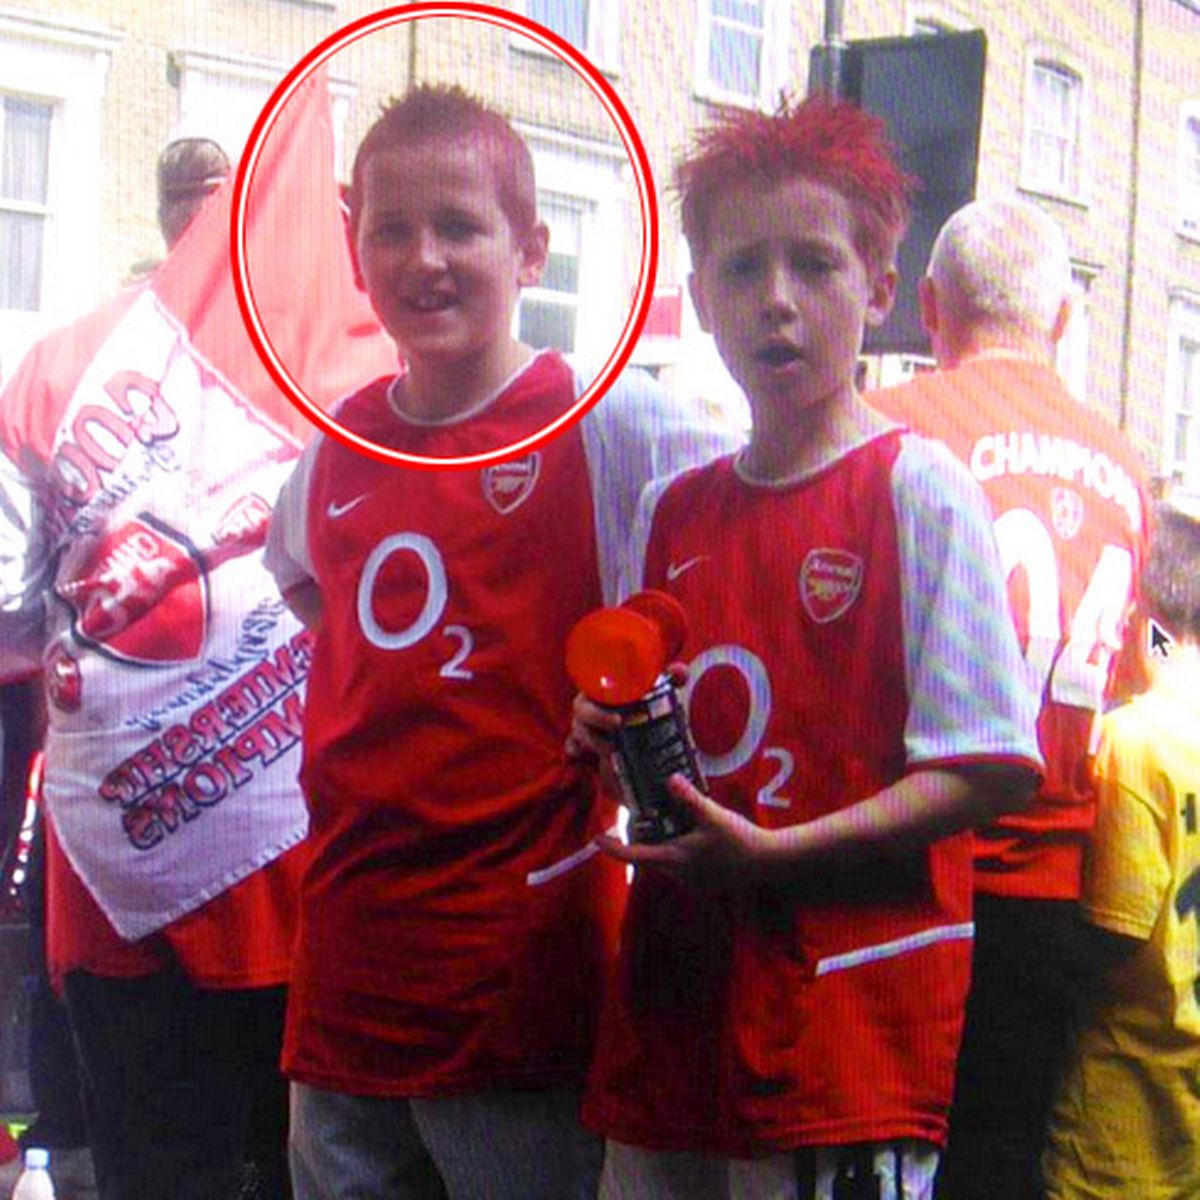 Why did Arsenal release Harry Kane? Harry Kane pictured as a youngster in an Arsenal kit with red hair